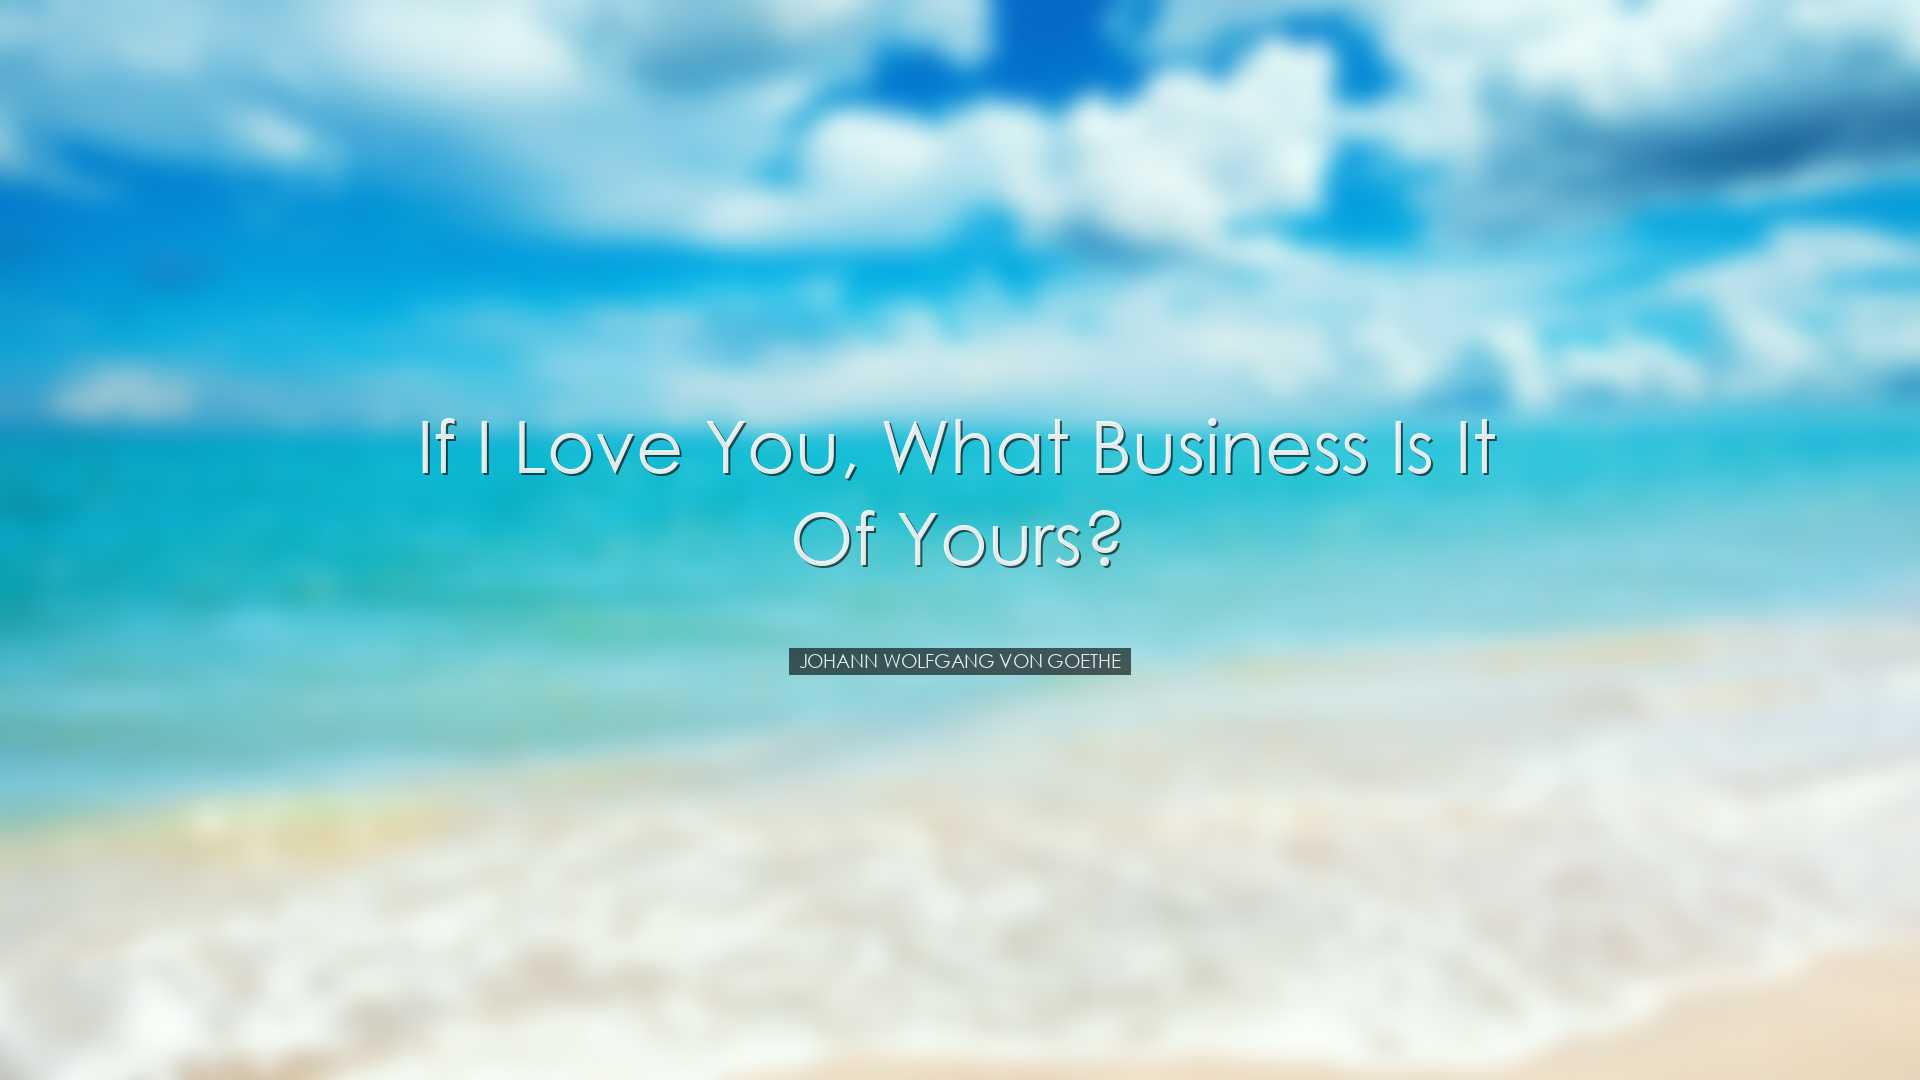 If I love you, what business is it of yours? - Johann Wolfgang von